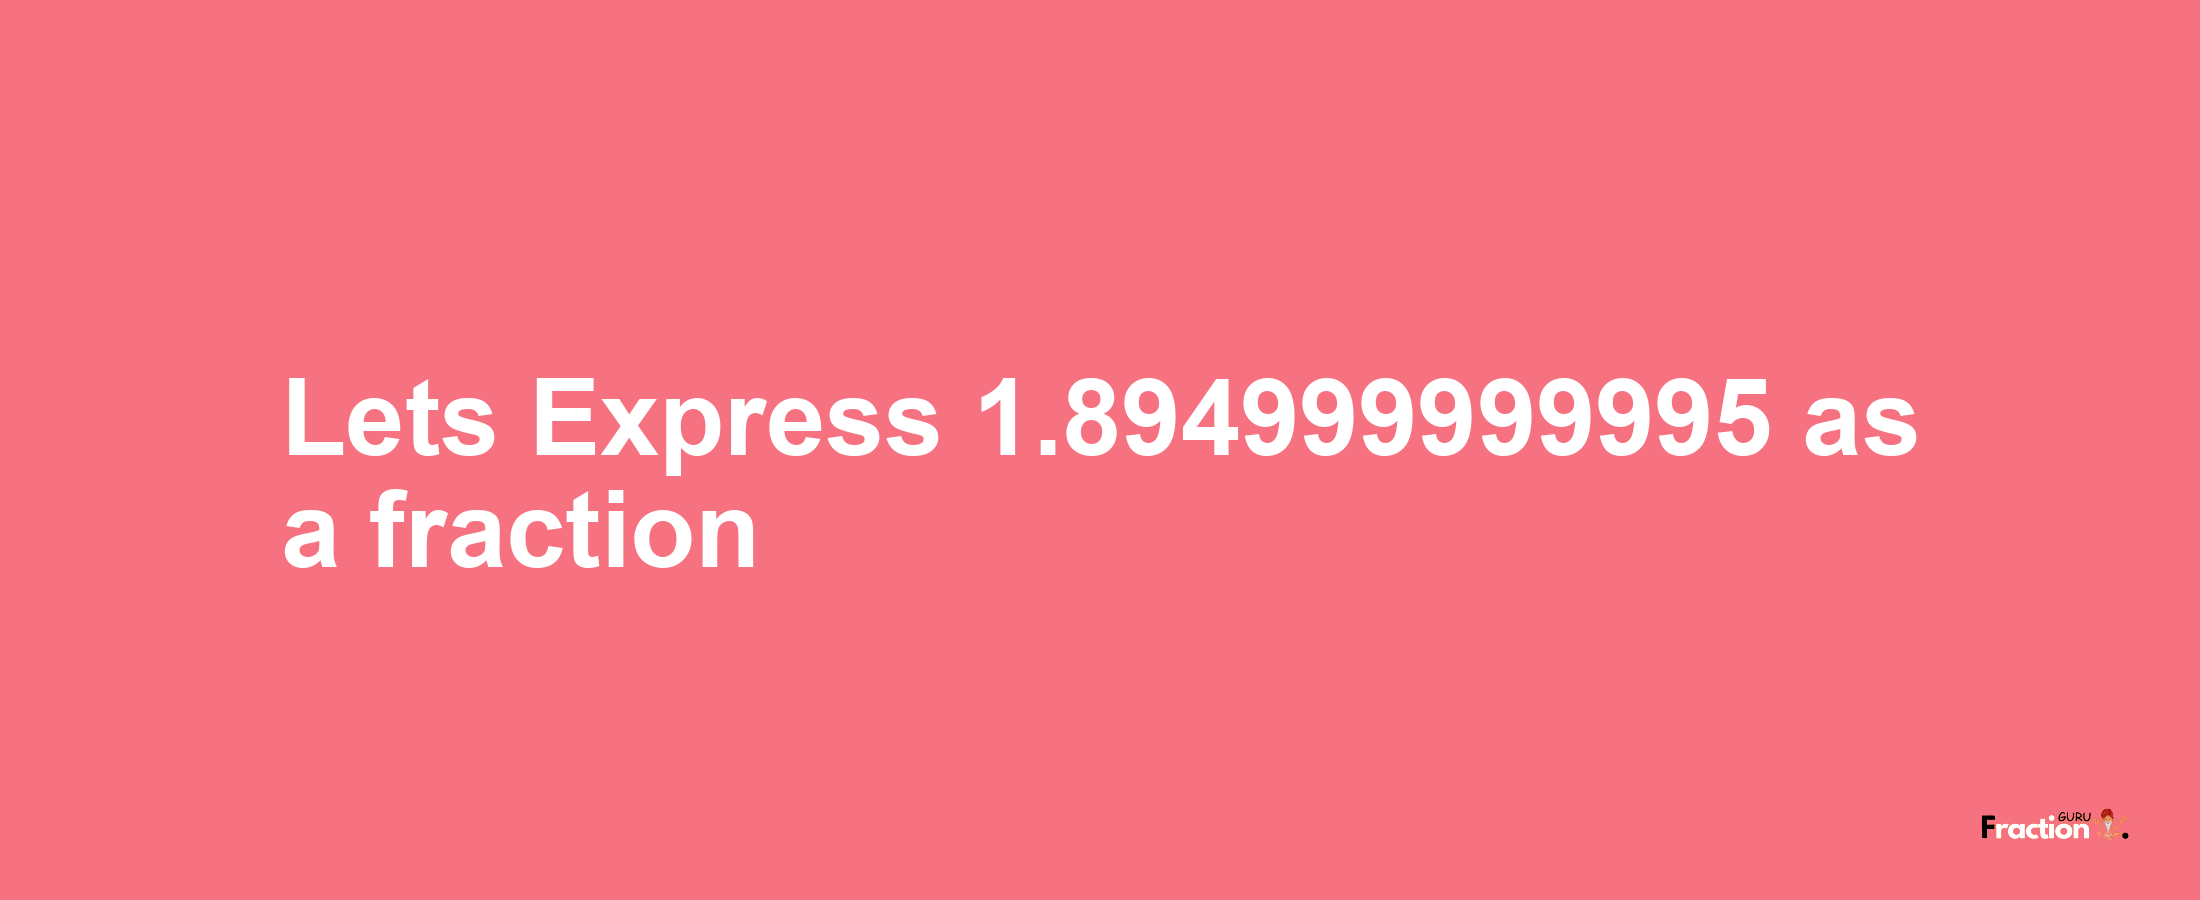 Lets Express 1.894999999995 as afraction